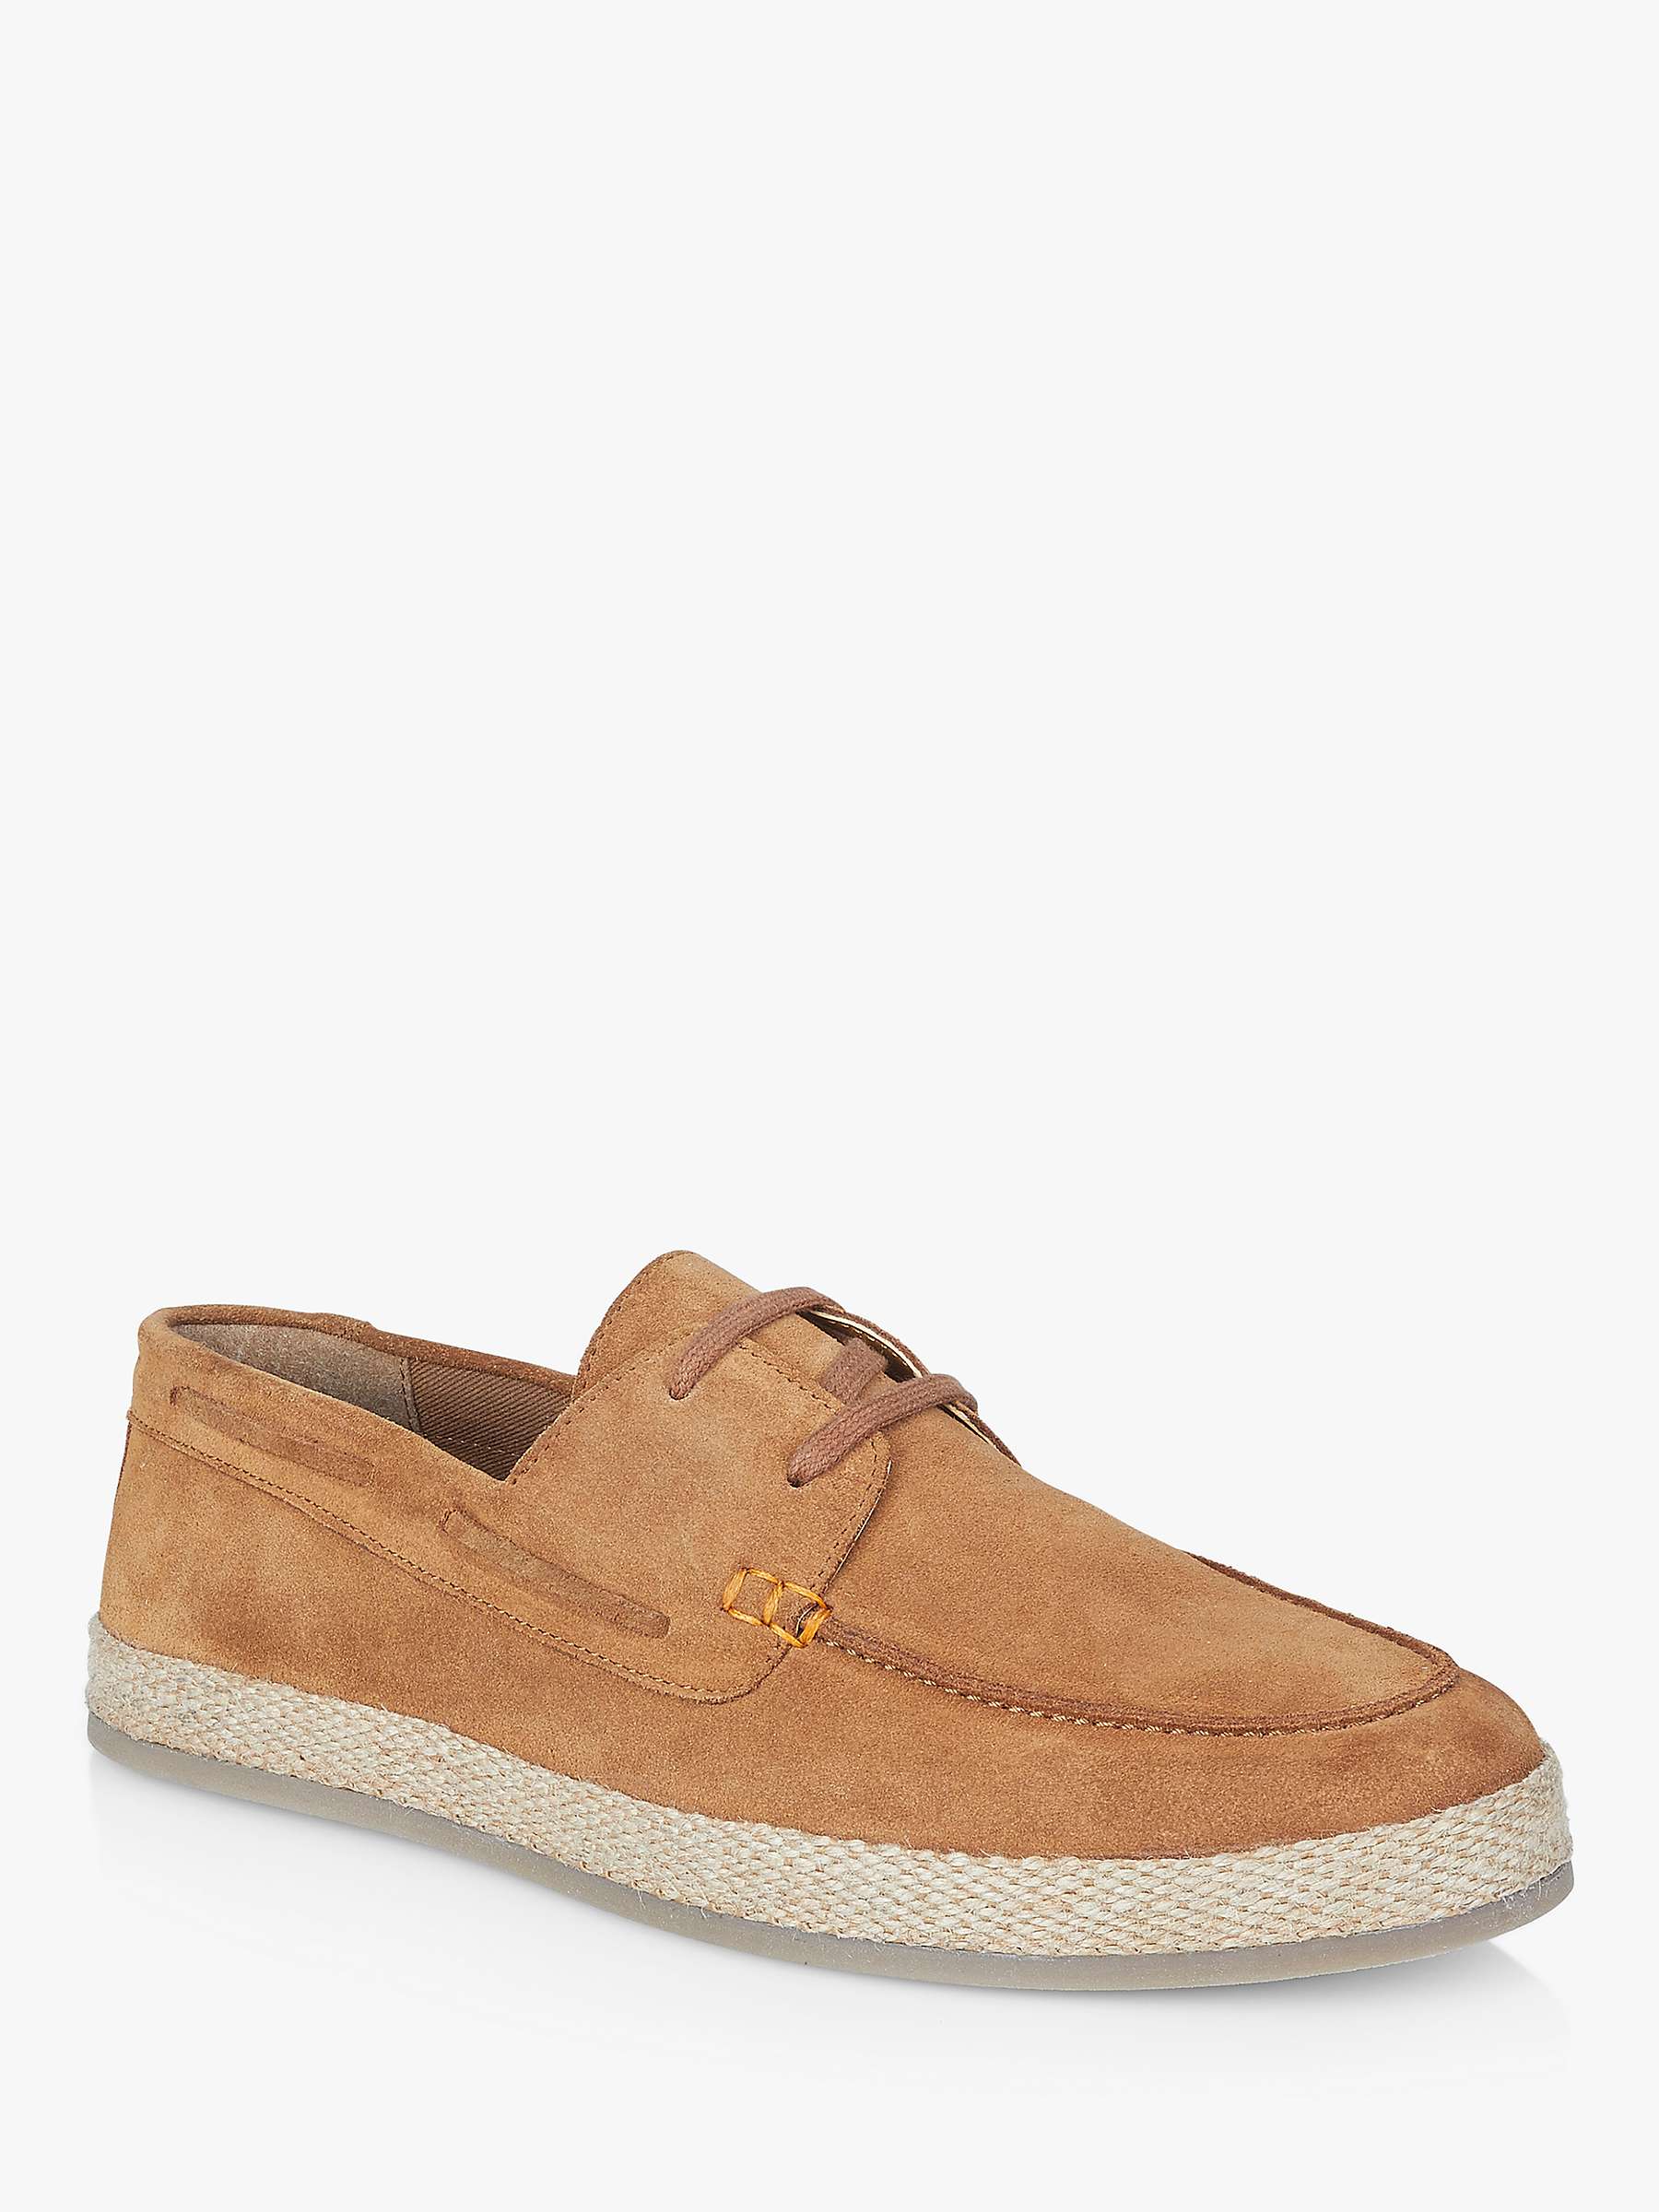 Buy Silver Street London Northolt Suede Lace Up Moccasin Shoes Online at johnlewis.com